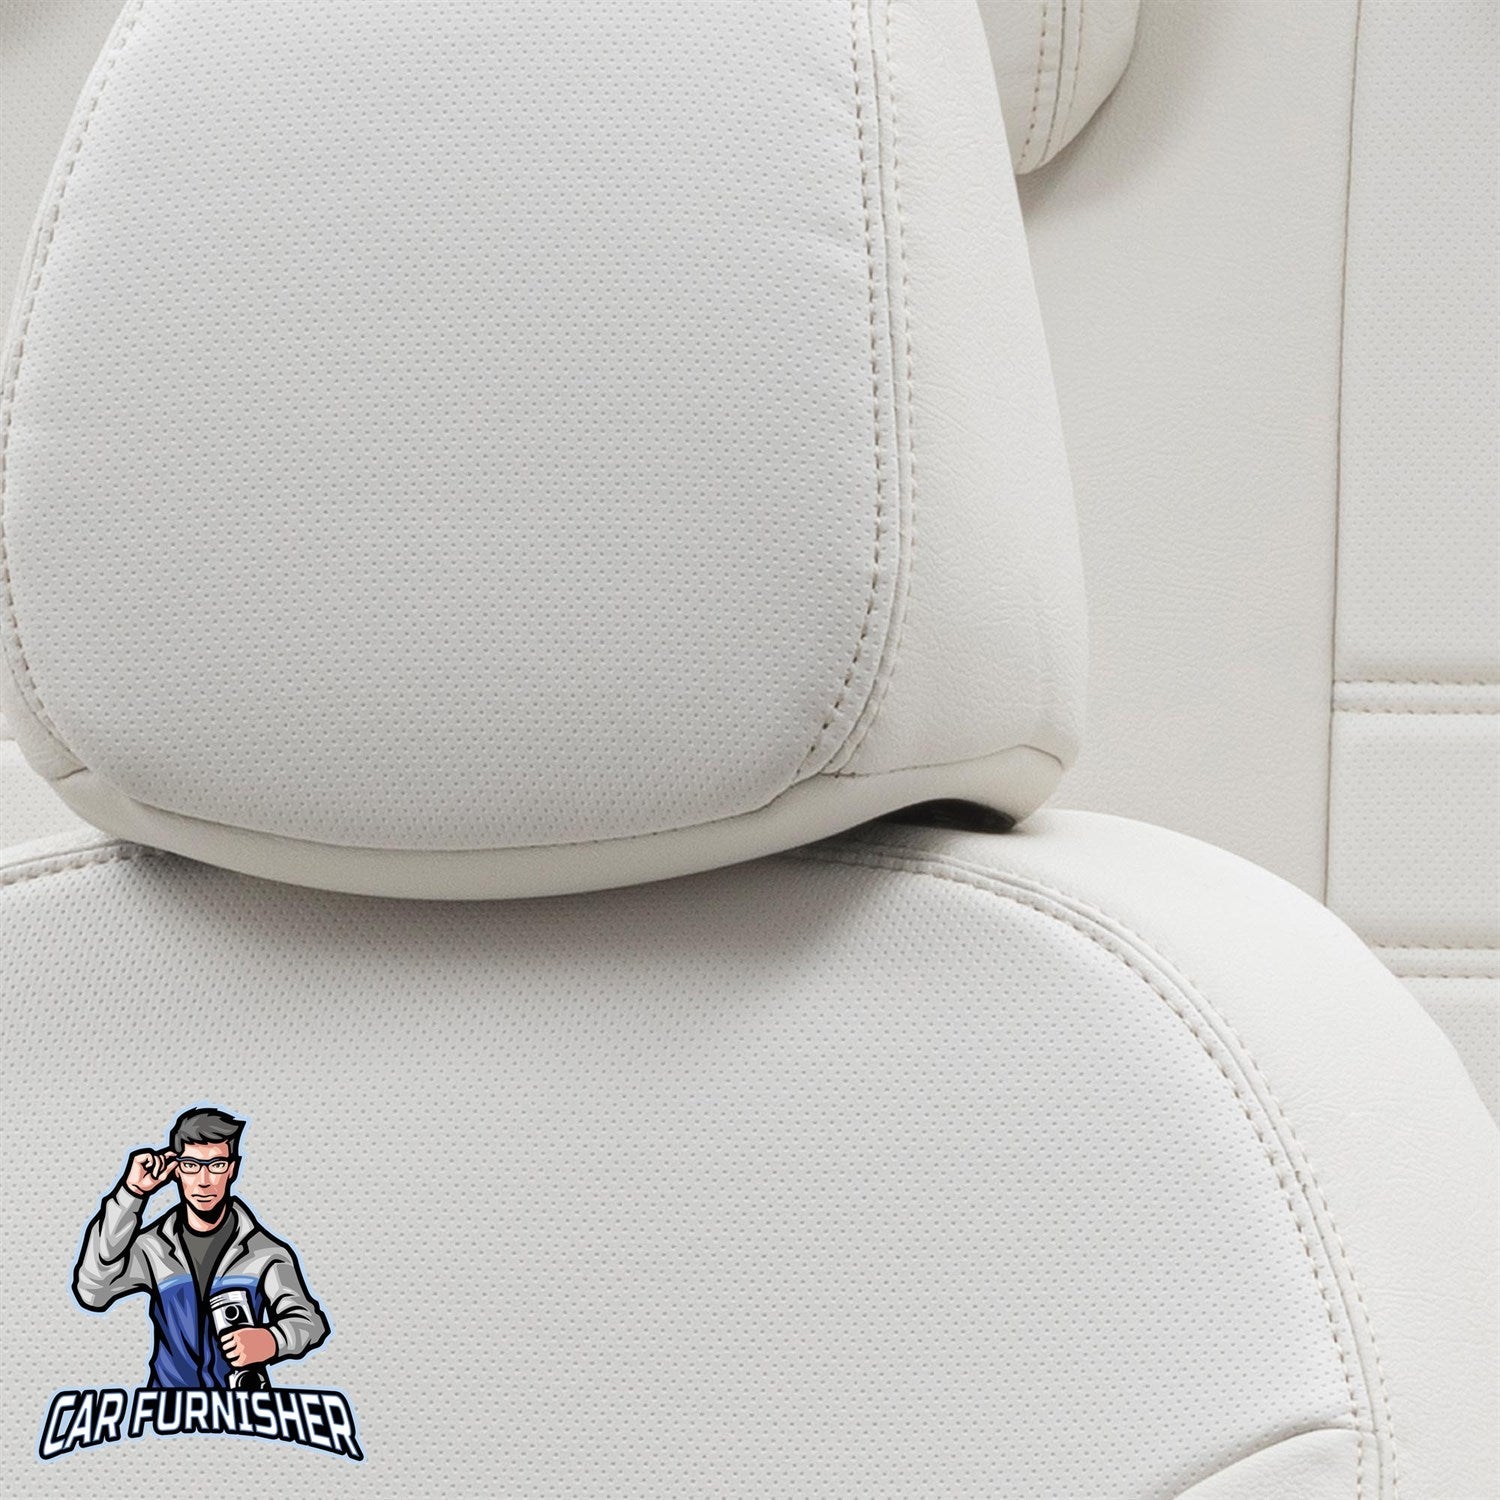 Mercedes CLS Seat Covers Istanbul Leather Design Ivory Leather